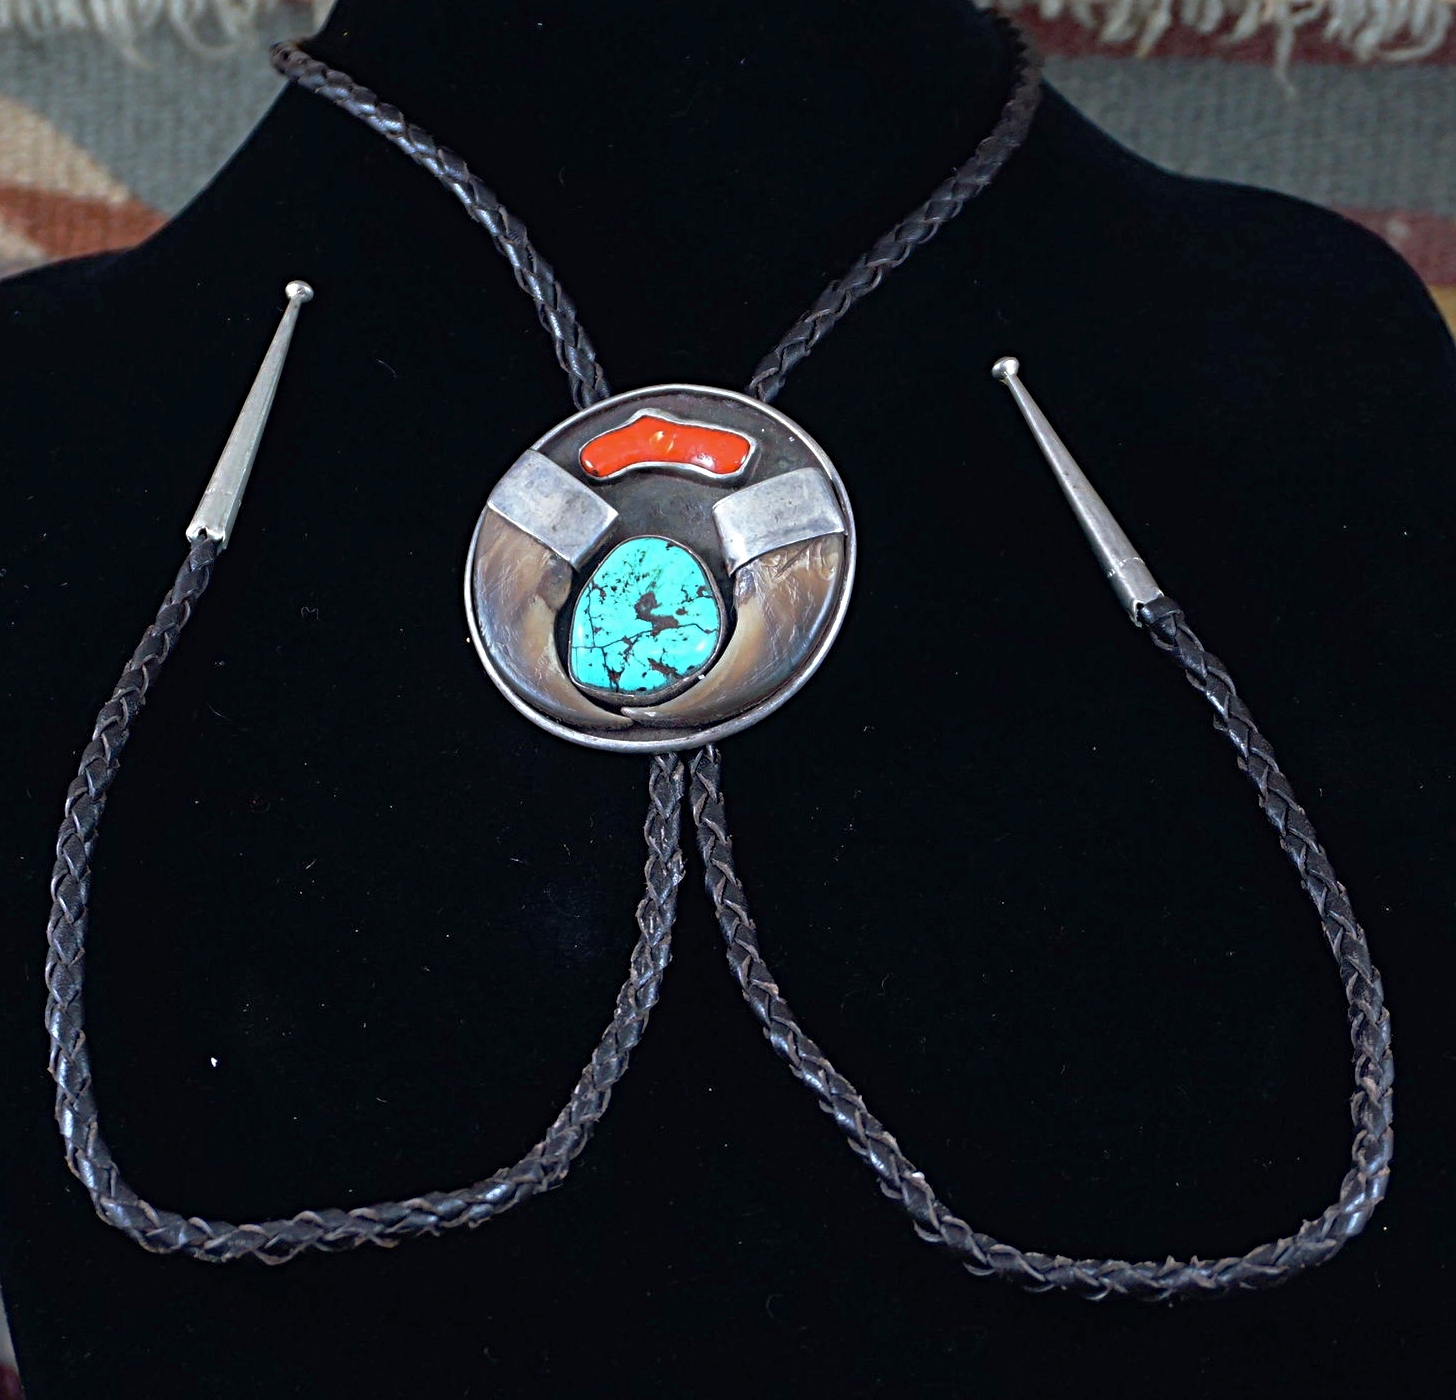 Father's Day Gift Southwestern Bola Necklace Wedding Indian Style Bear Claw Bolo Tie Bolos Neckties Boho Silver Antiqued Turquoise #80322-1